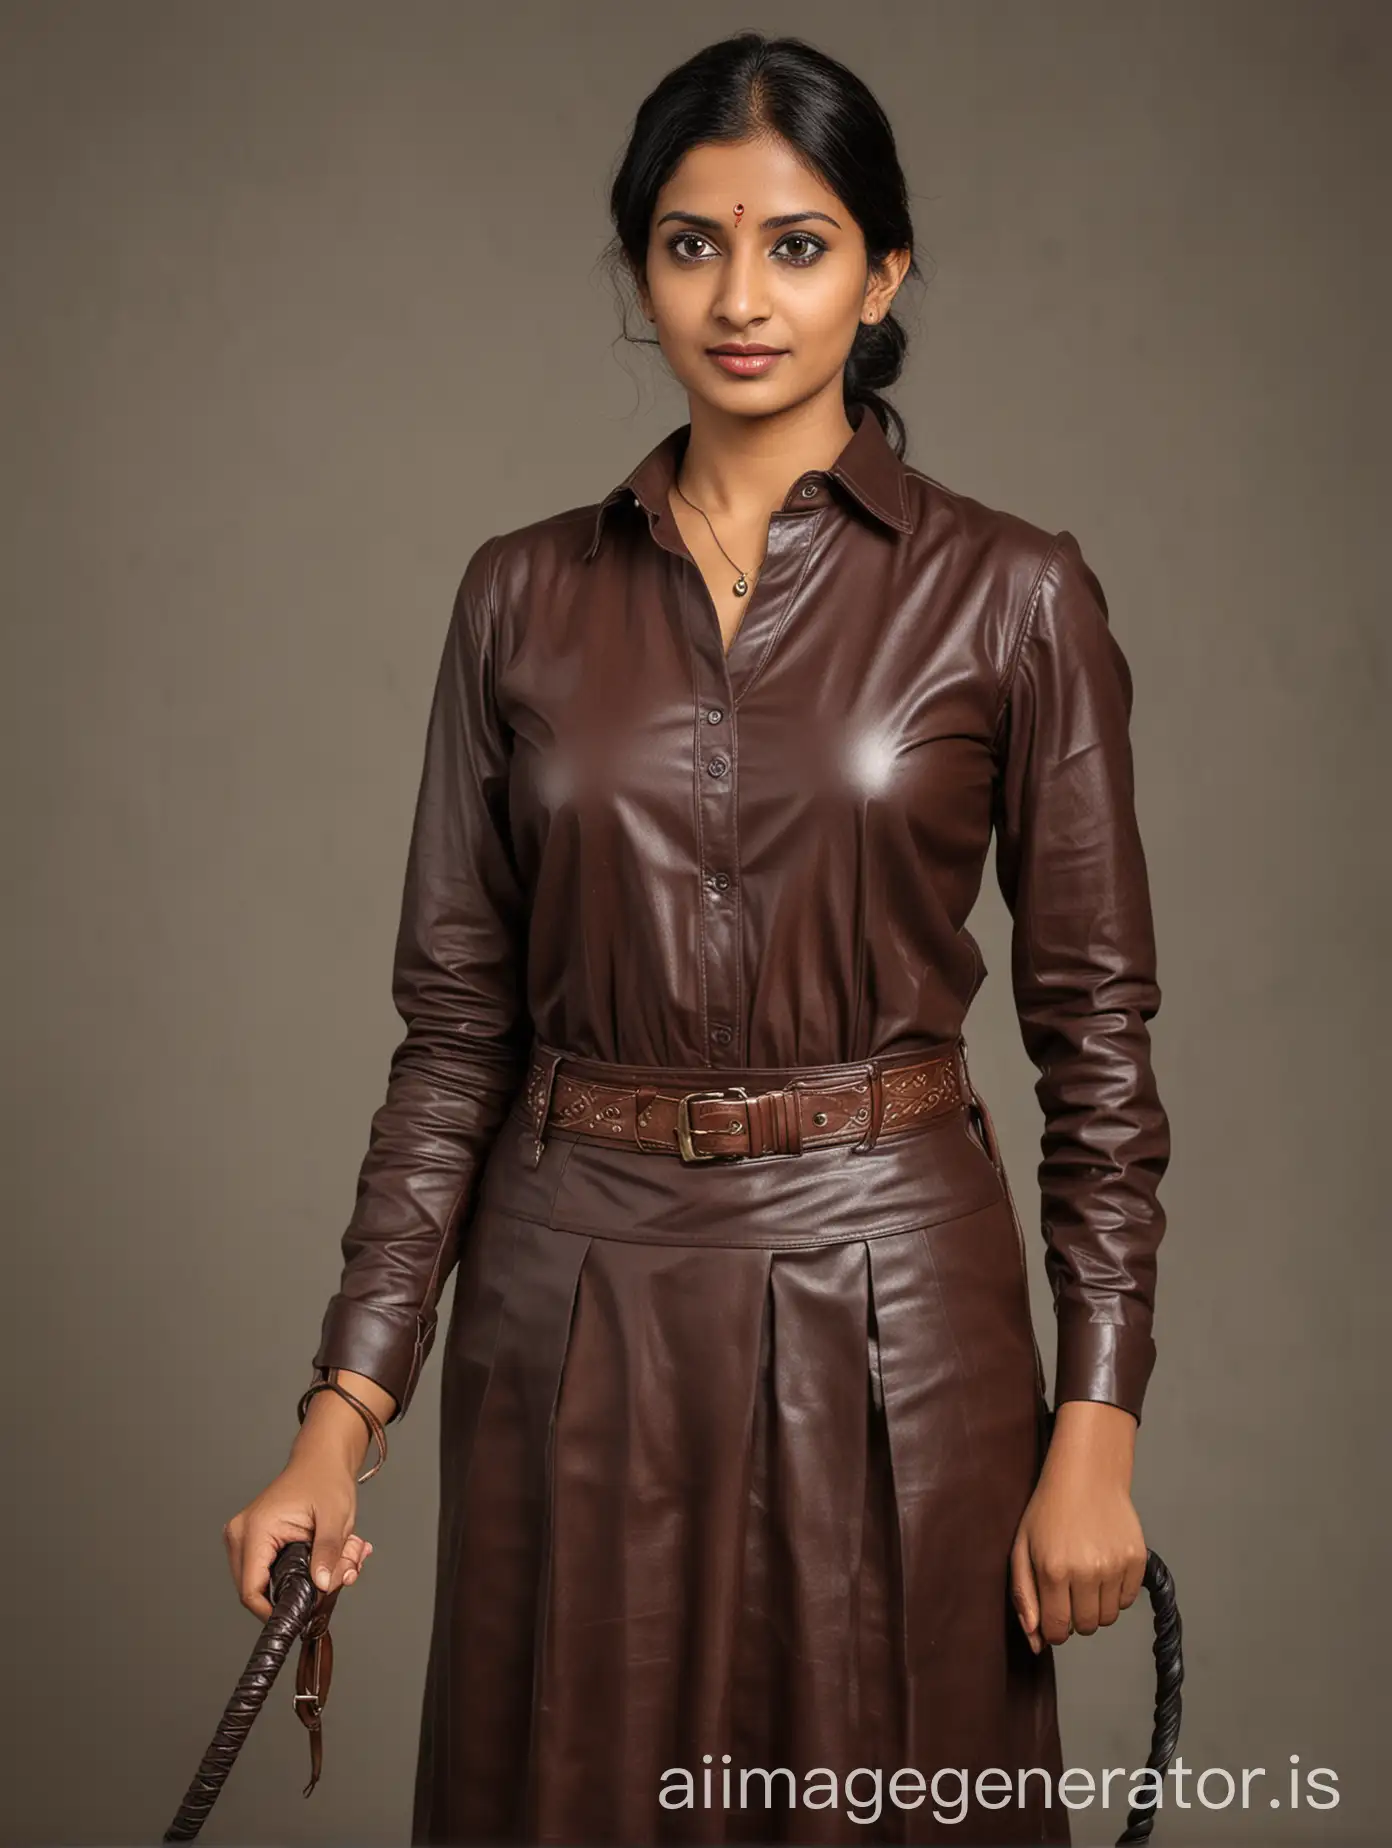 Indian teacher with leather whip in her left hand